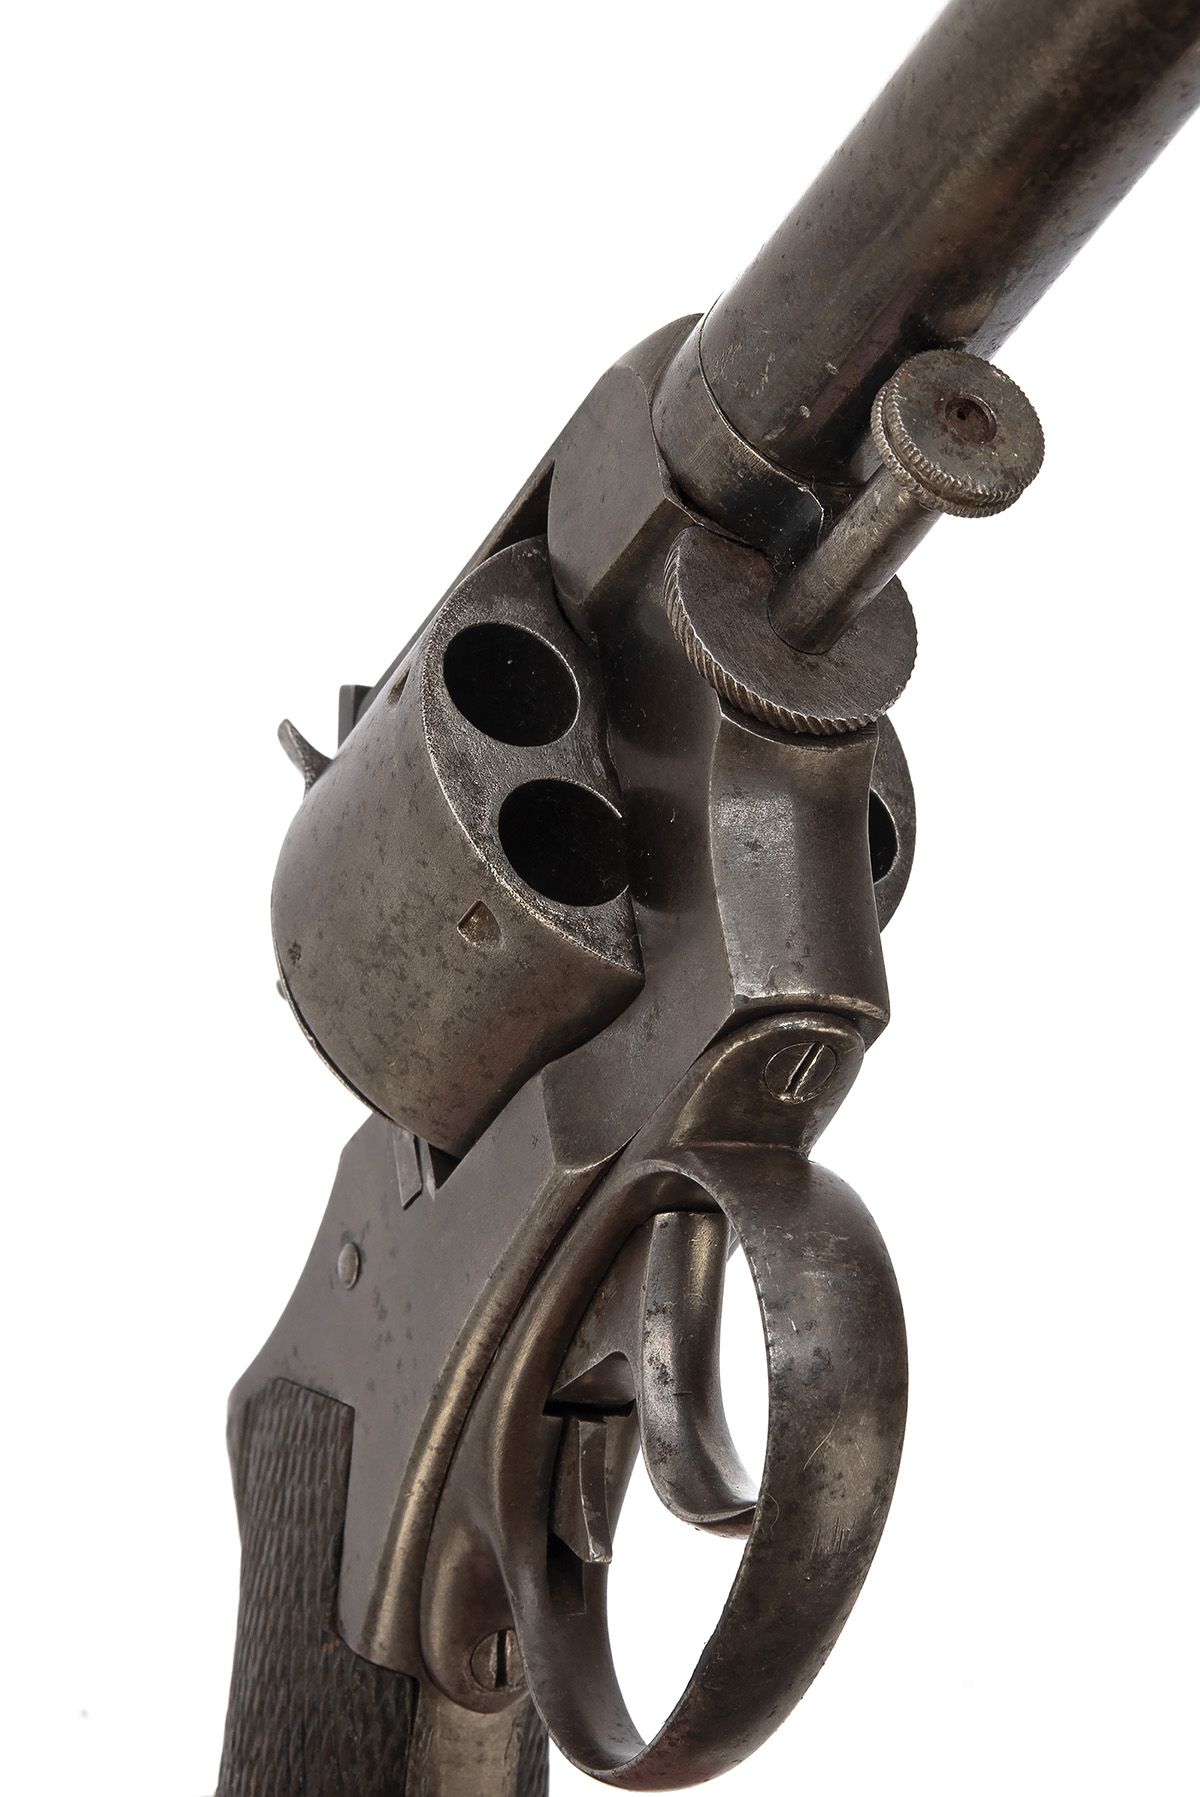 AN INSCRIBED .442 WEBLEY MKI R.I.C. REVOLVER RETAILED BY ROSIER, MELBOURNE, serial no. 17252, - Image 5 of 8